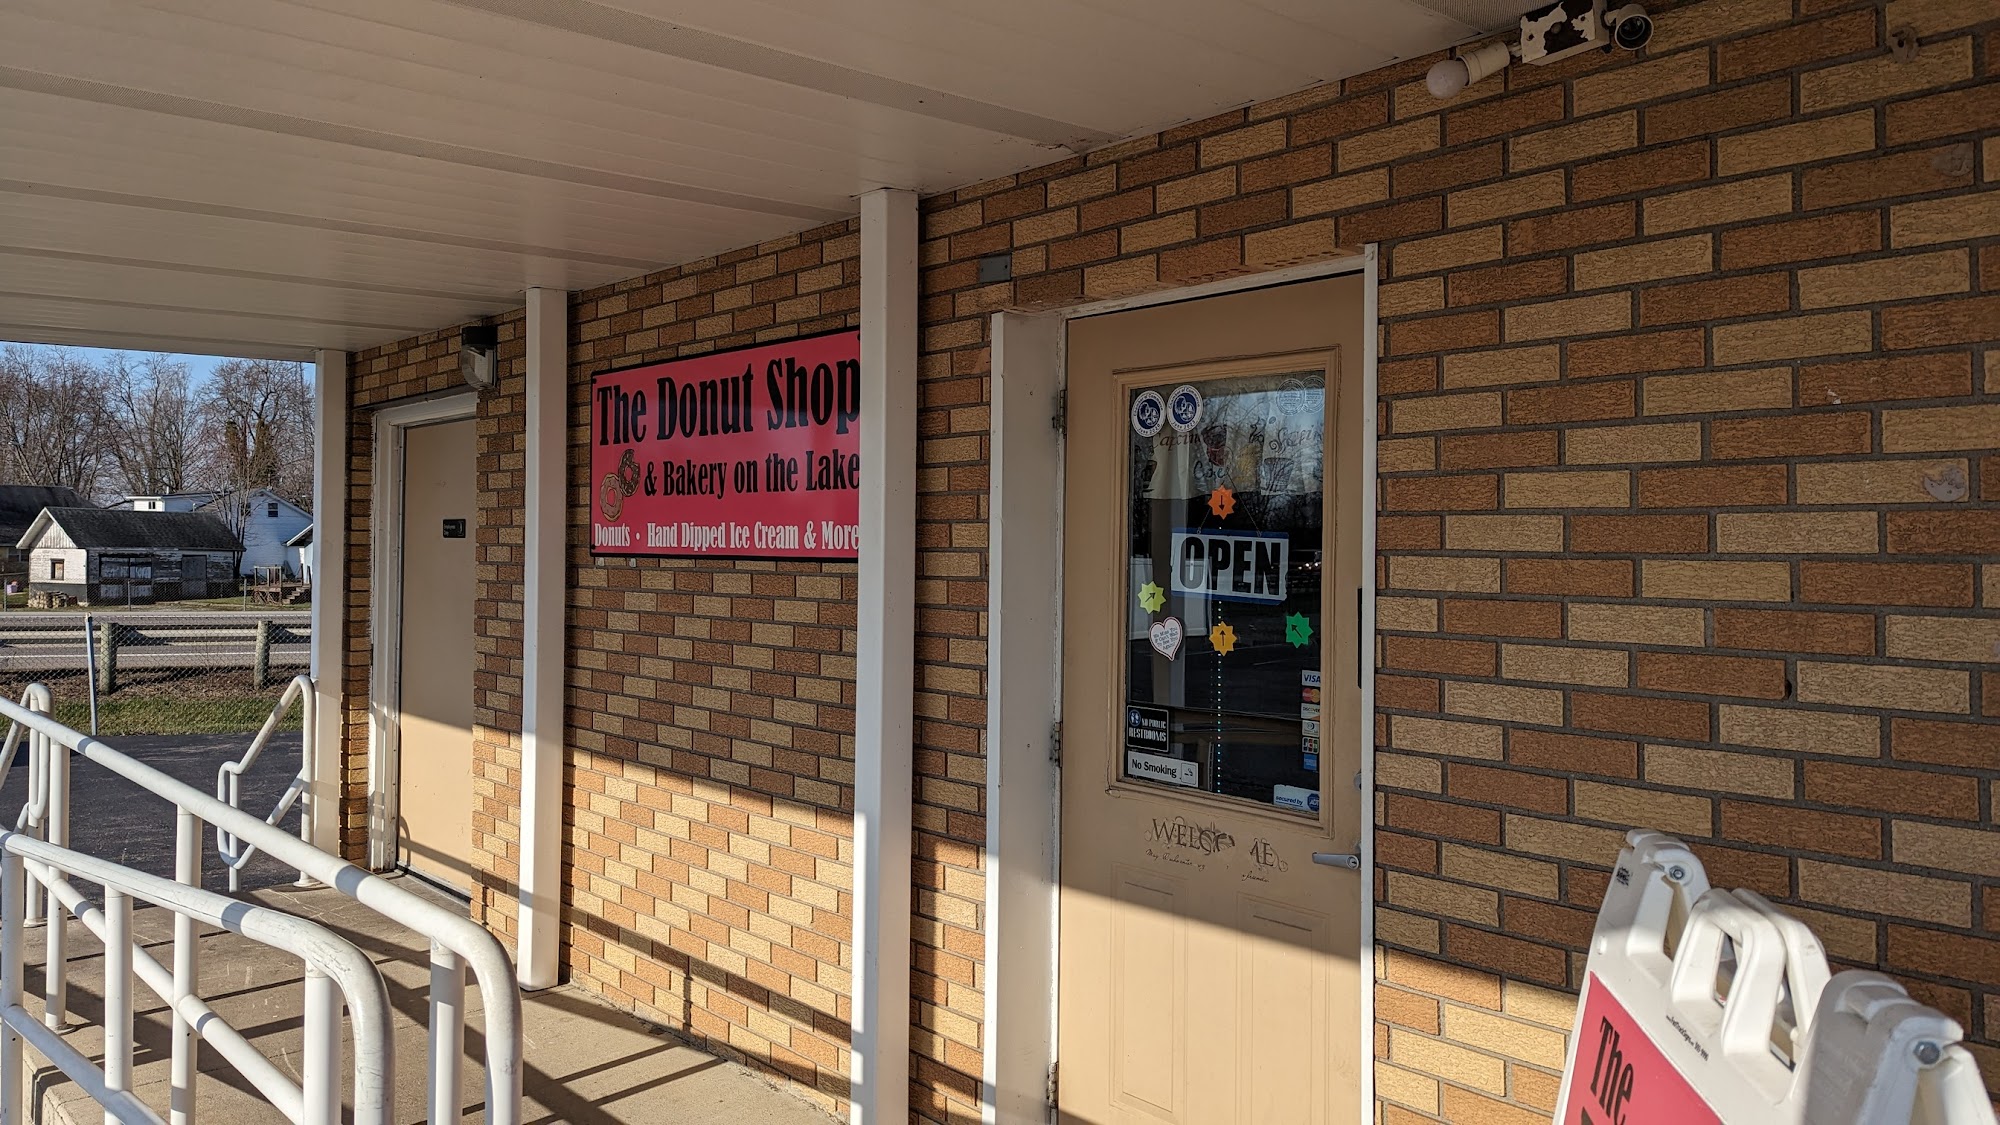 The Donut Shop and Bakery on the Lake, LLC